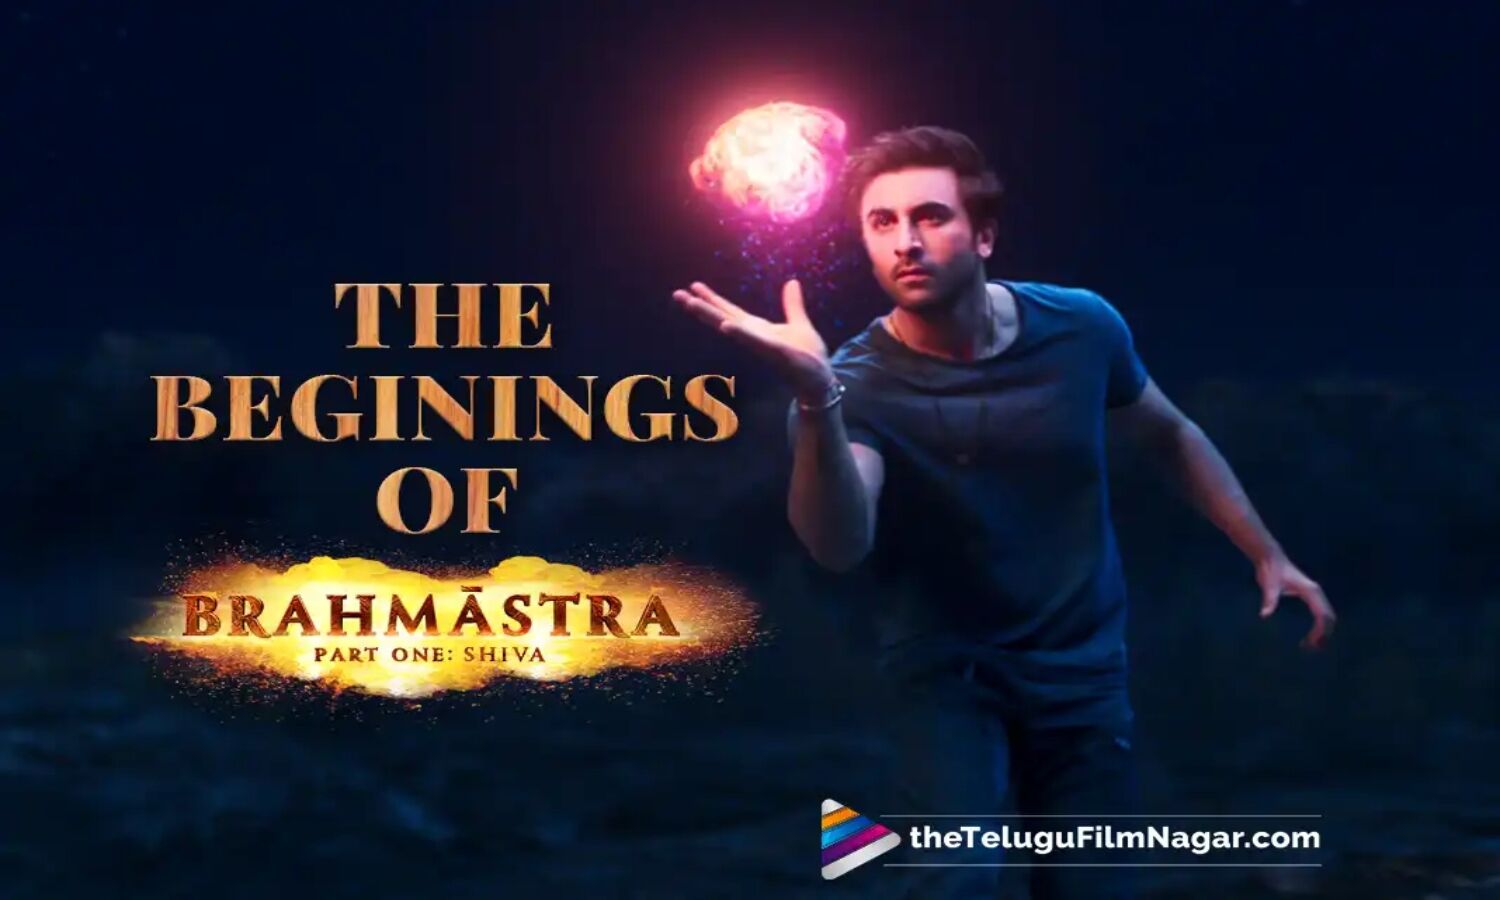 Brahmastra Video: How the journey of the film Brahmastra started, let’s know through this video